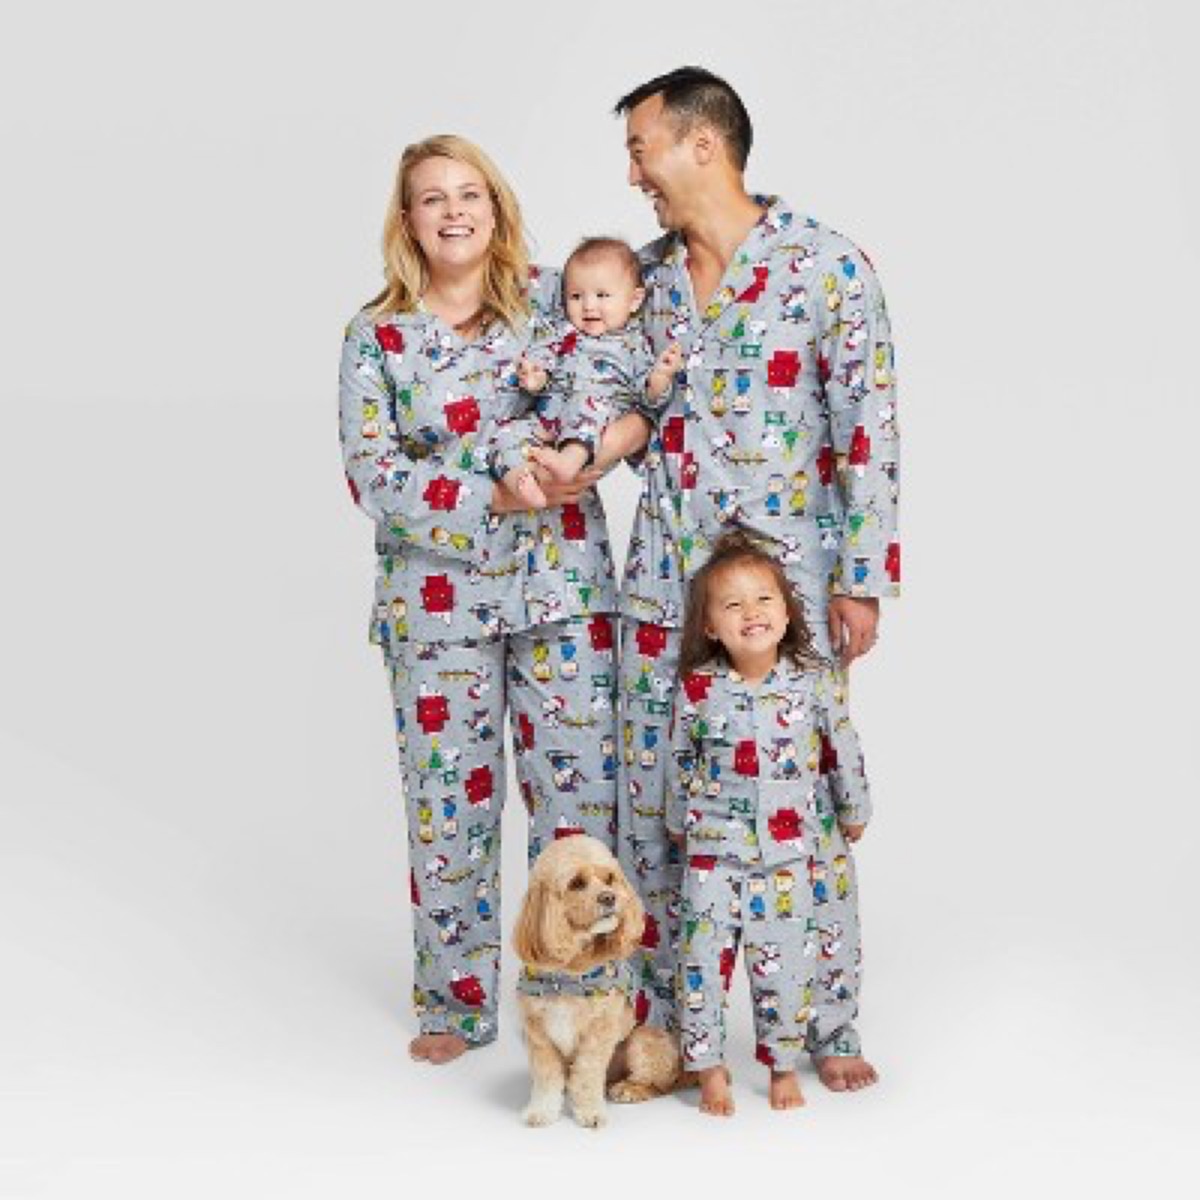 man, woman, two children, and dog in gray peanuts pajamas